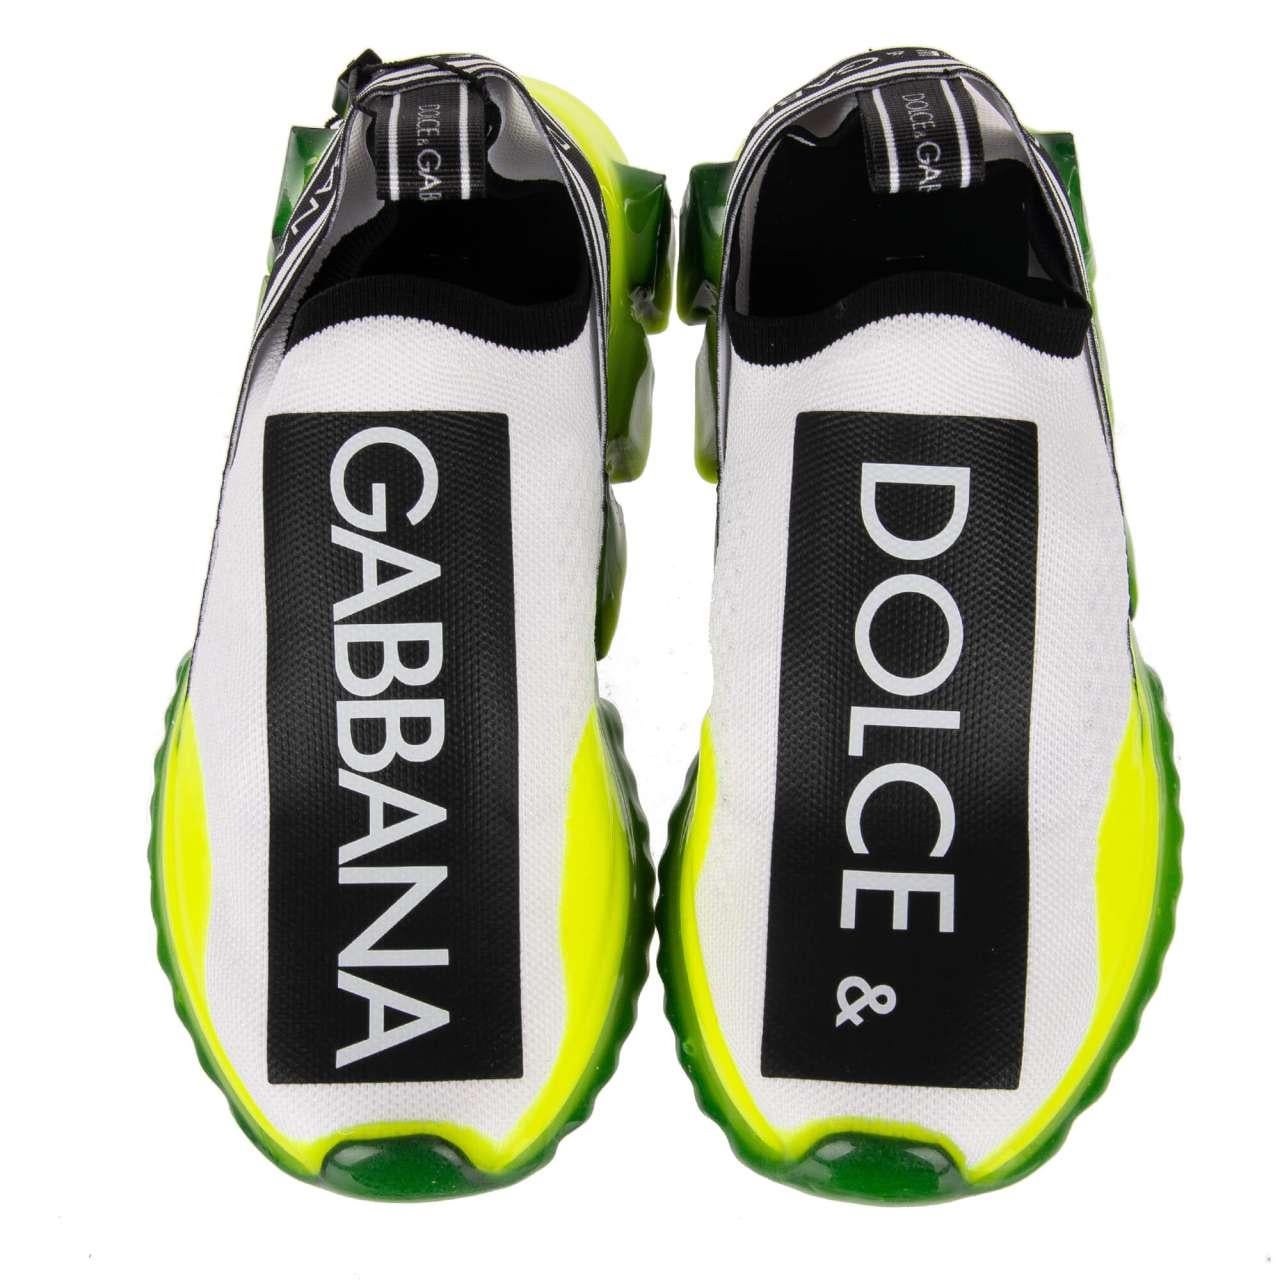 - Elastic Slip-On Sneaker SORRENTO with Dolce&Gabbana Logo stripes in white, neon yellow and black by DOLCE & GABBANA - New with Box - MADE IN ITALY - Former RRP: EUR 645 - Model: CK1595-AK235-8R154 - Material: 70% Polyester, 15% Viscose, 10% Nylon,